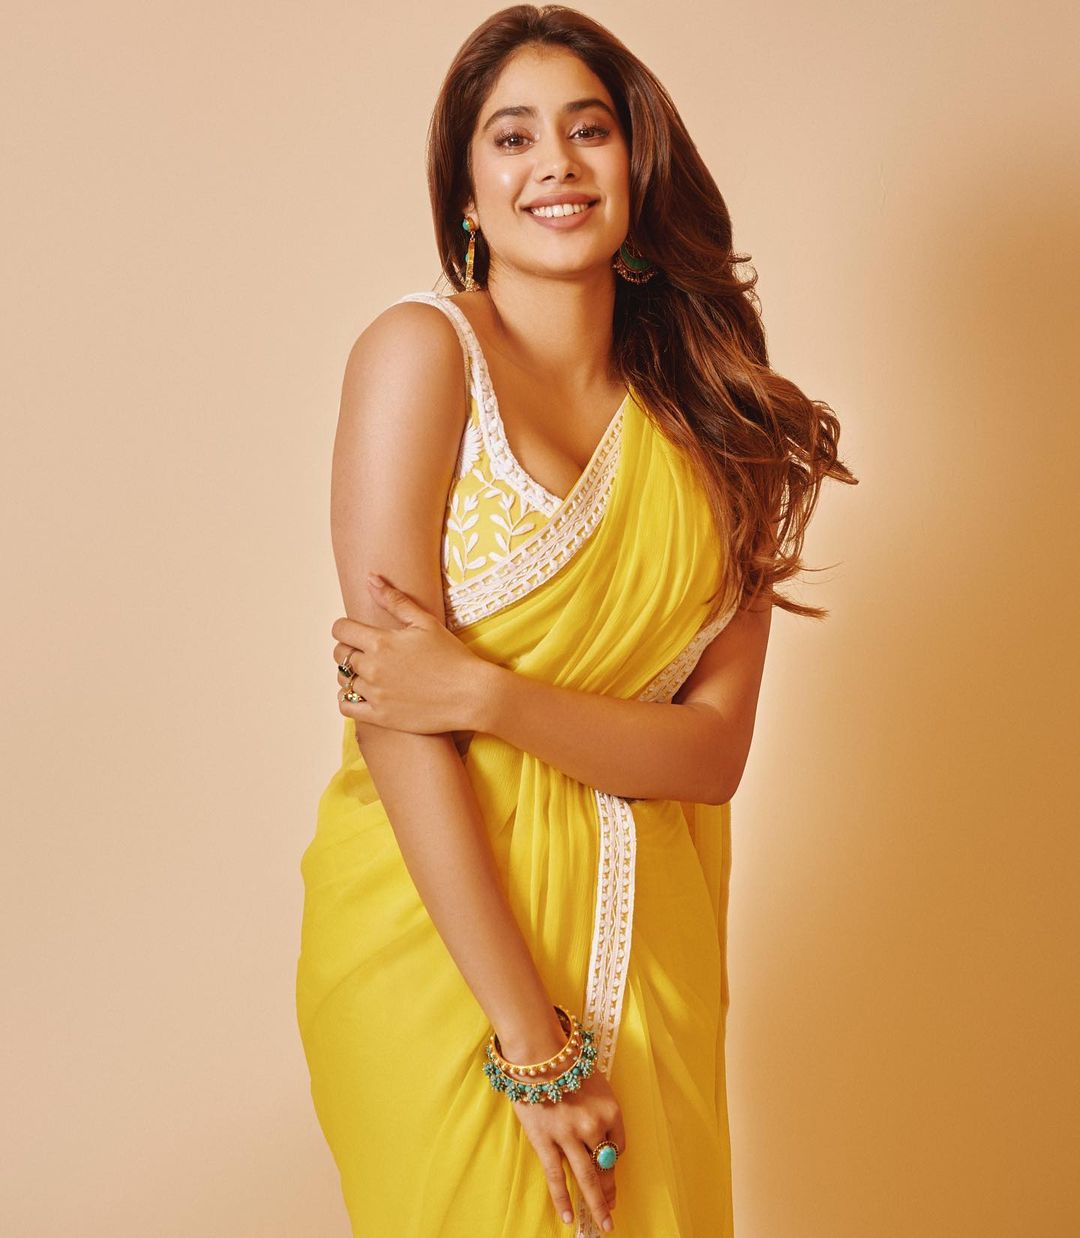 Janhvi Kapoor makes fans go wow with her stunning yellow saree